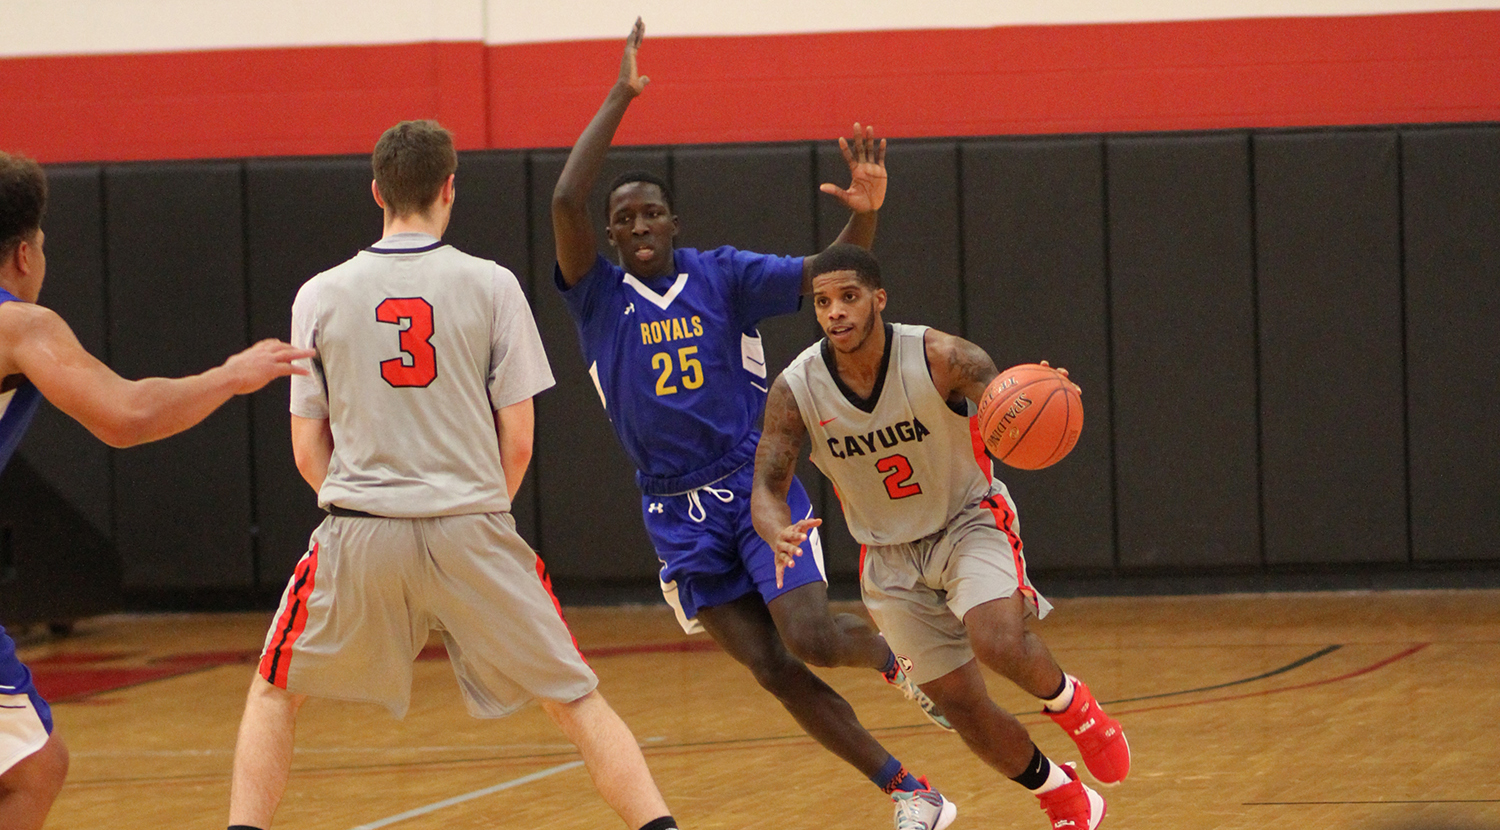 Stanley Beato, right, had 16 points and 10 rebounds for Cayuga in their 78-71 win over Tompkins Cortland.